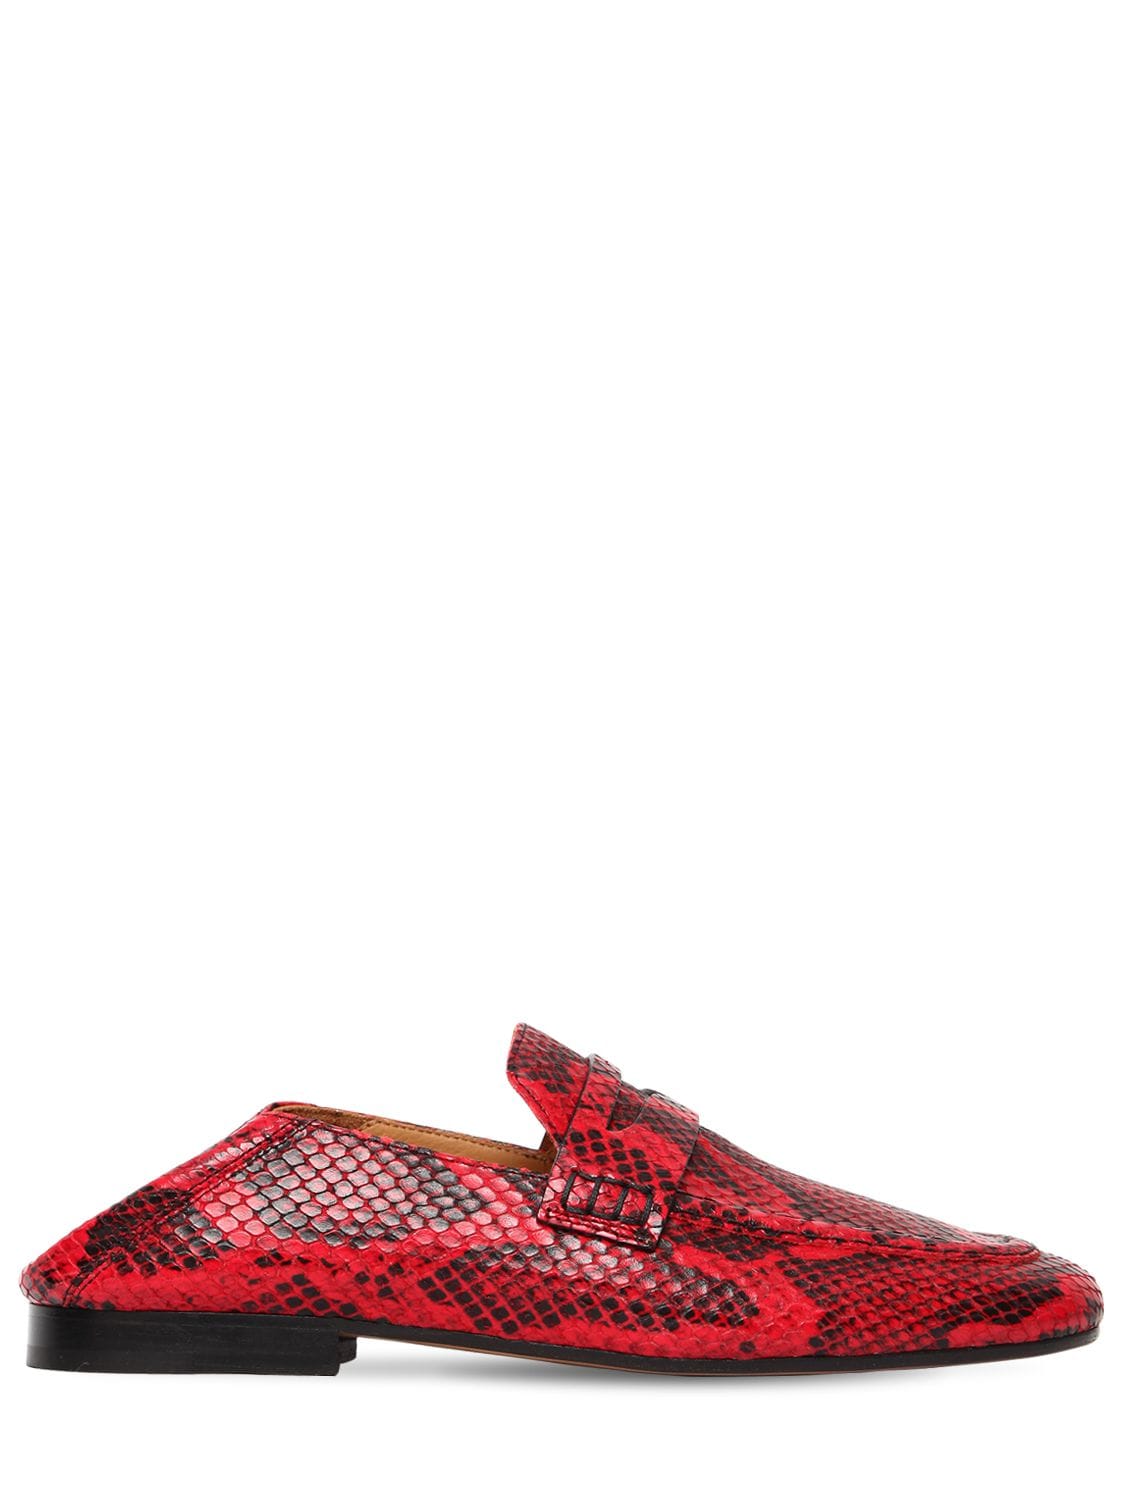 ISABEL MARANT 10MM FEZZY PYTHON PRINTED PENNY LOAFERS,69IE1C003-NZBSRA2